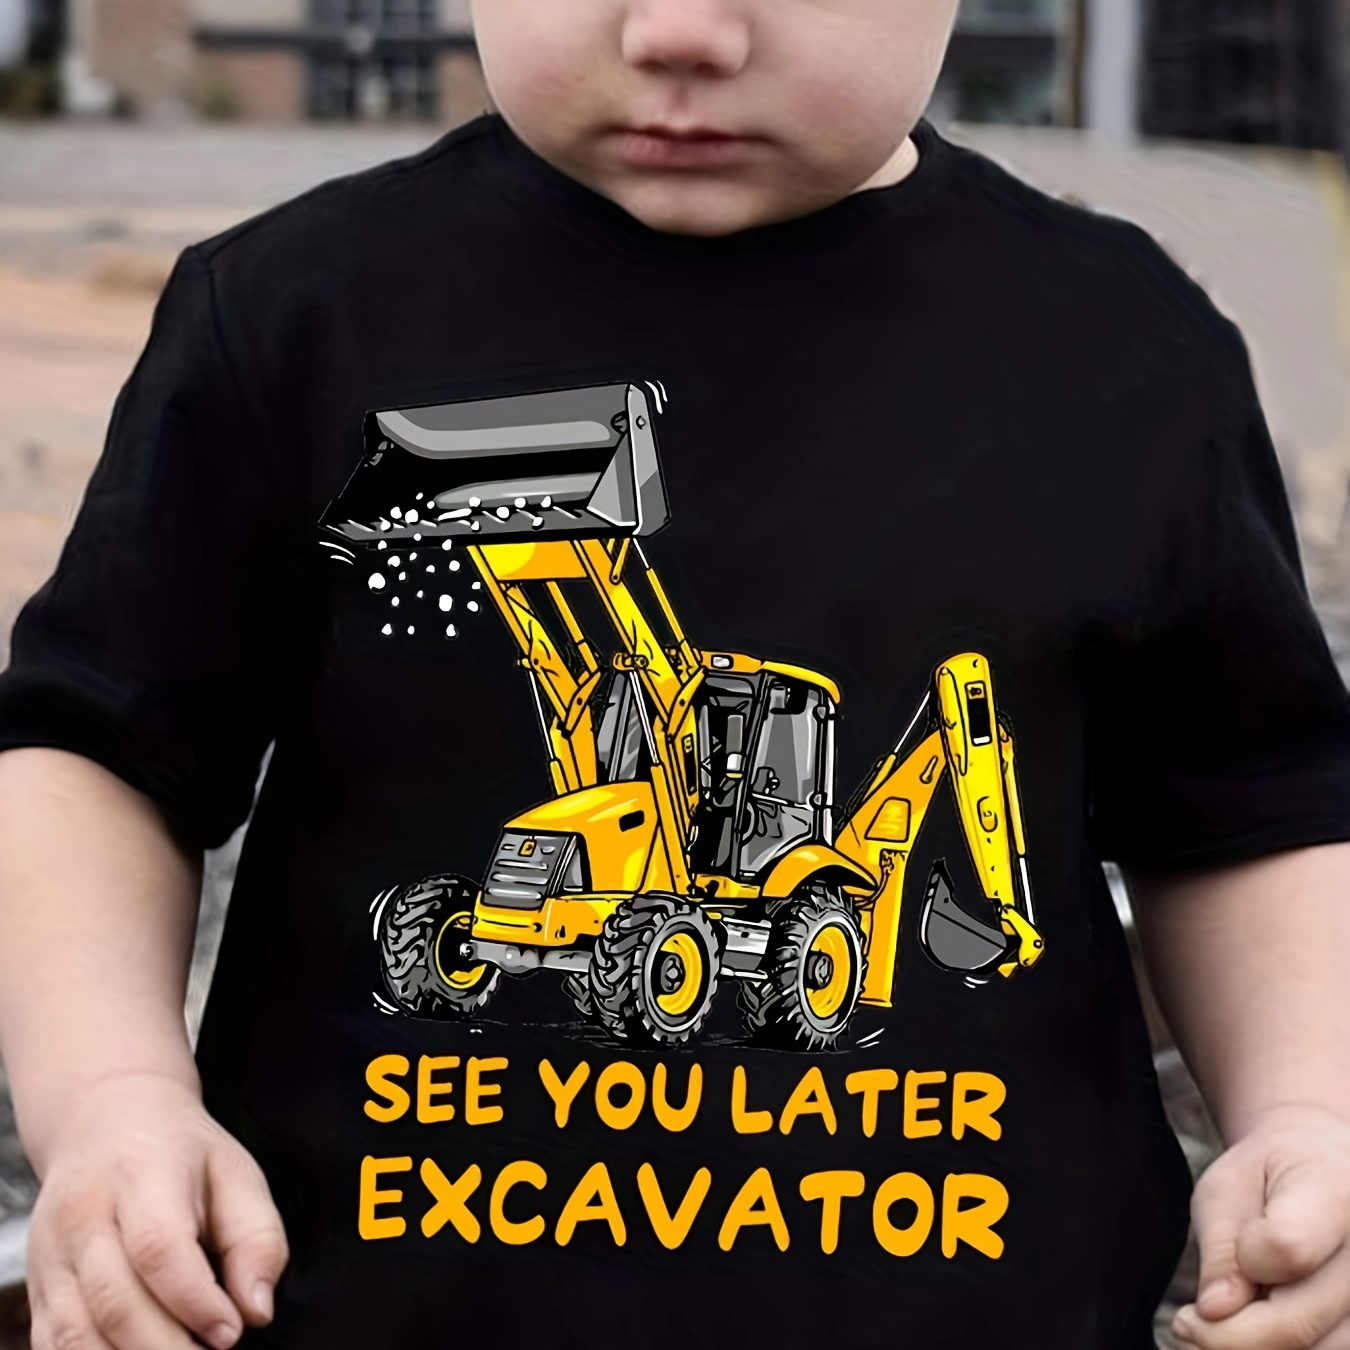 

See You Later Excavator Print Boy's T-shirt, Kids Casual Short Sleeve Crew Neck Breathable Comfy Summer Tee Tops